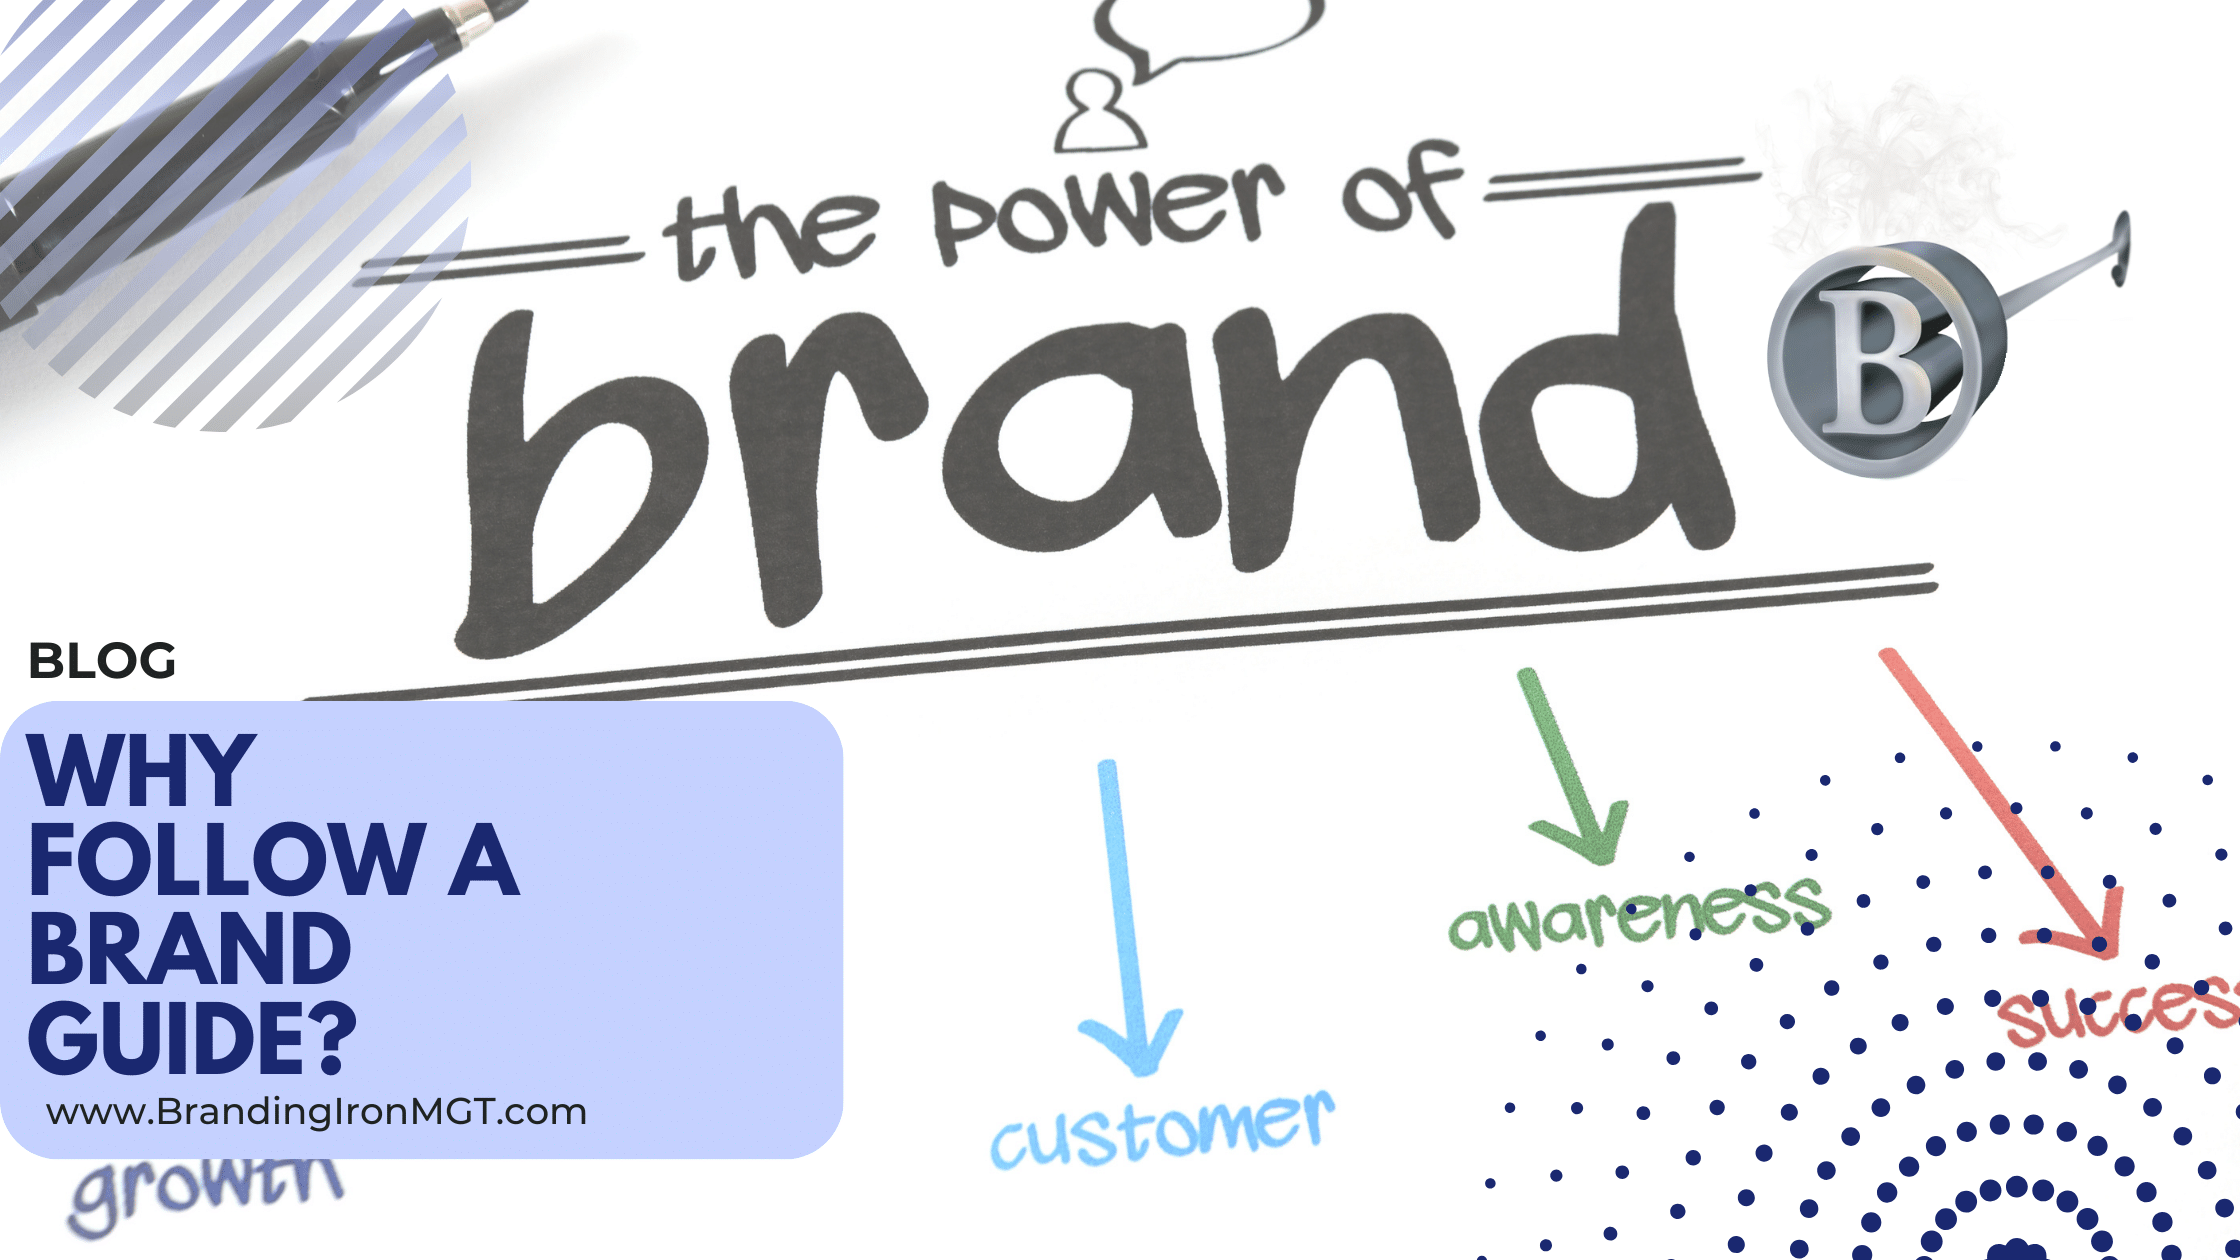 Why follow a Brand Guide?